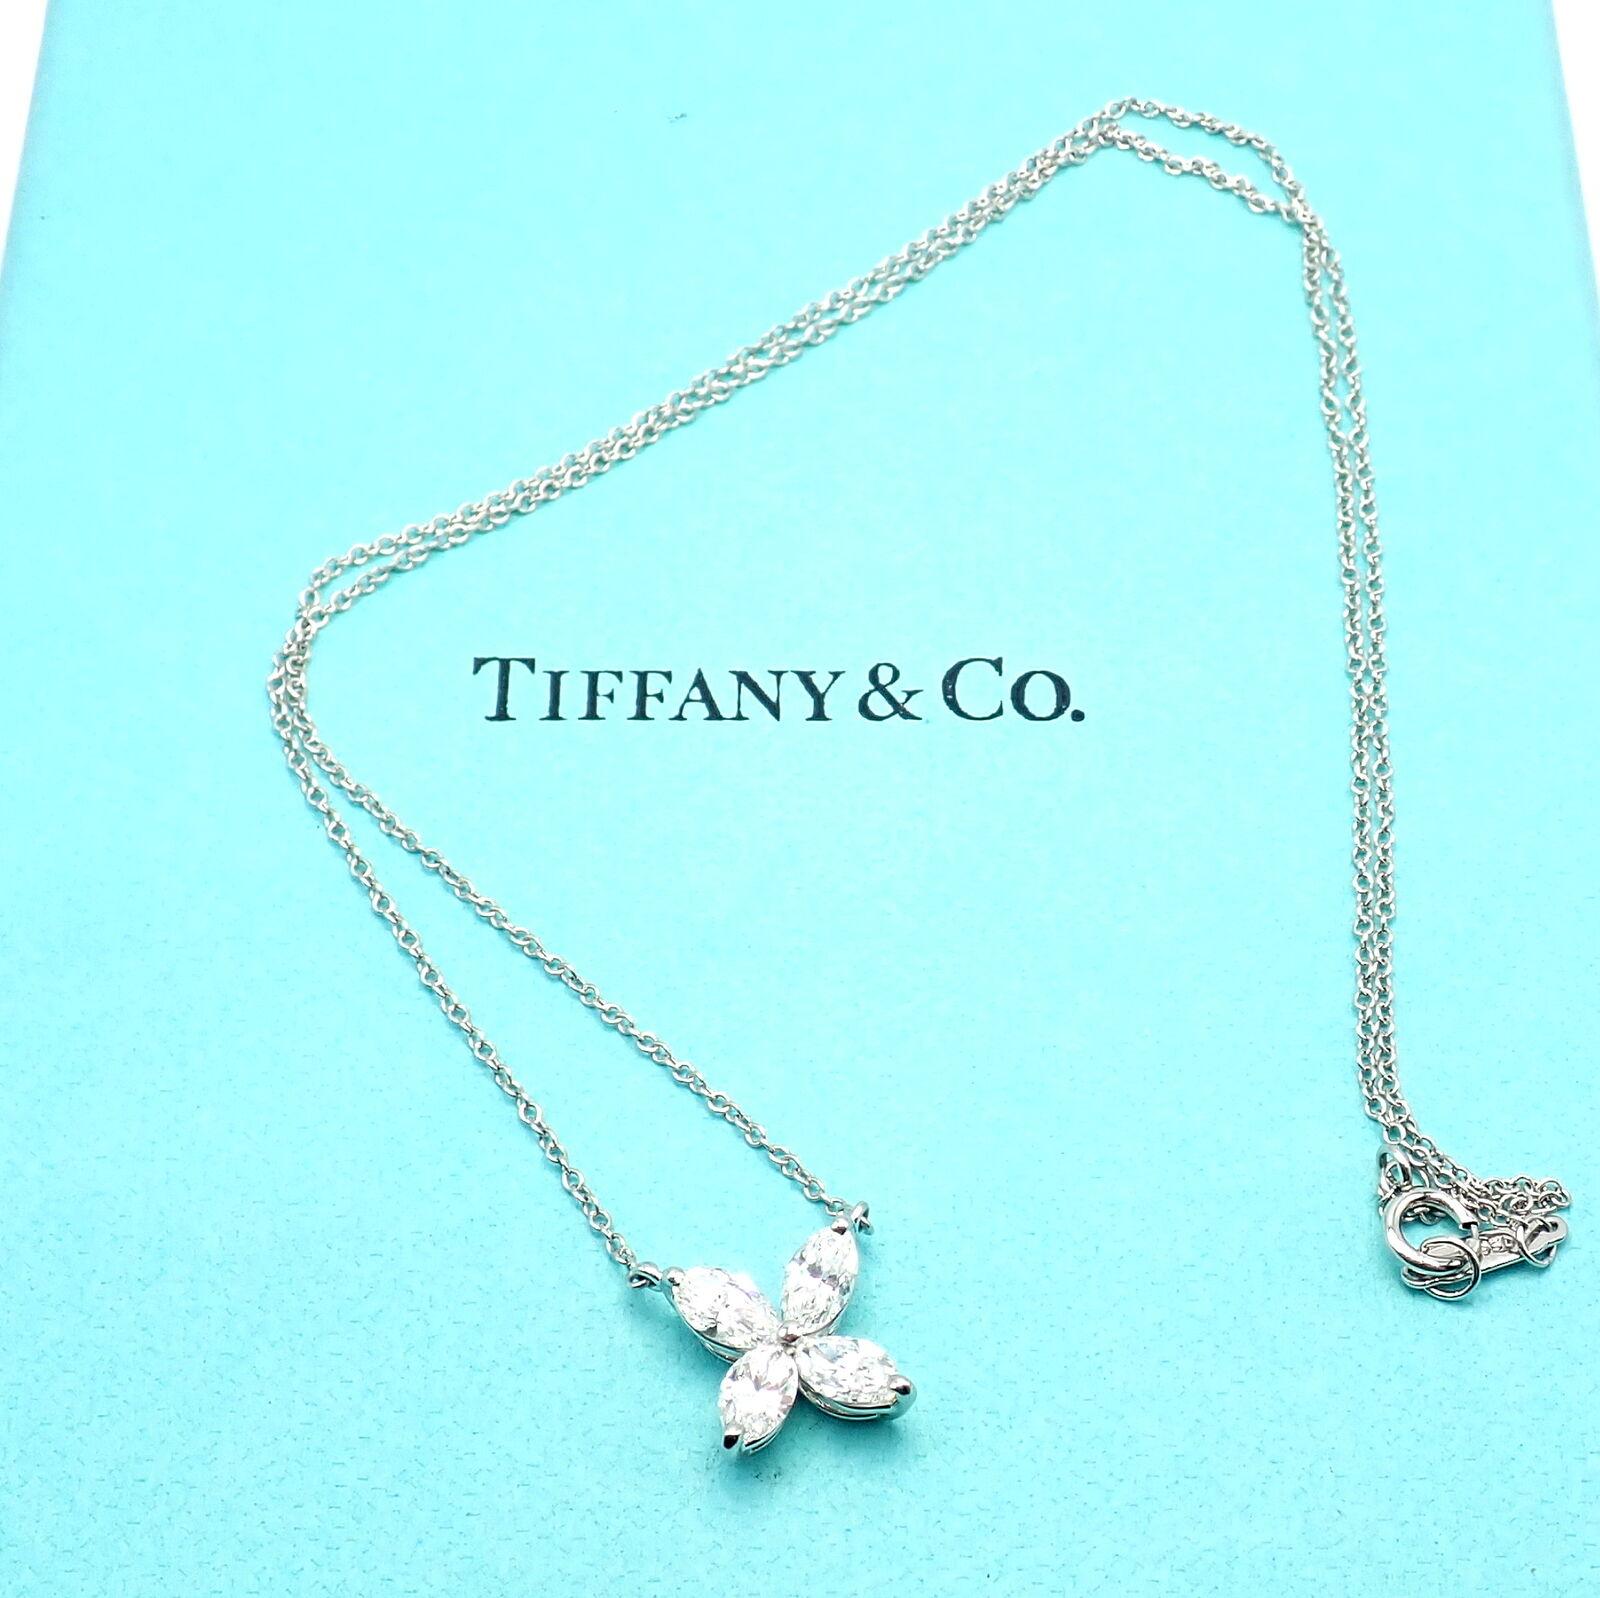 Platinum Victoria Diamond Large Pendant Necklace by Tiffany & Co. 
Authentic Tiffany & Co Victoria large pendant necklace, exquisitely crafted in platinum. Adorned with a stunning 0.81ctw of marquise diamonds, it radiates elegance. 
This piece, part